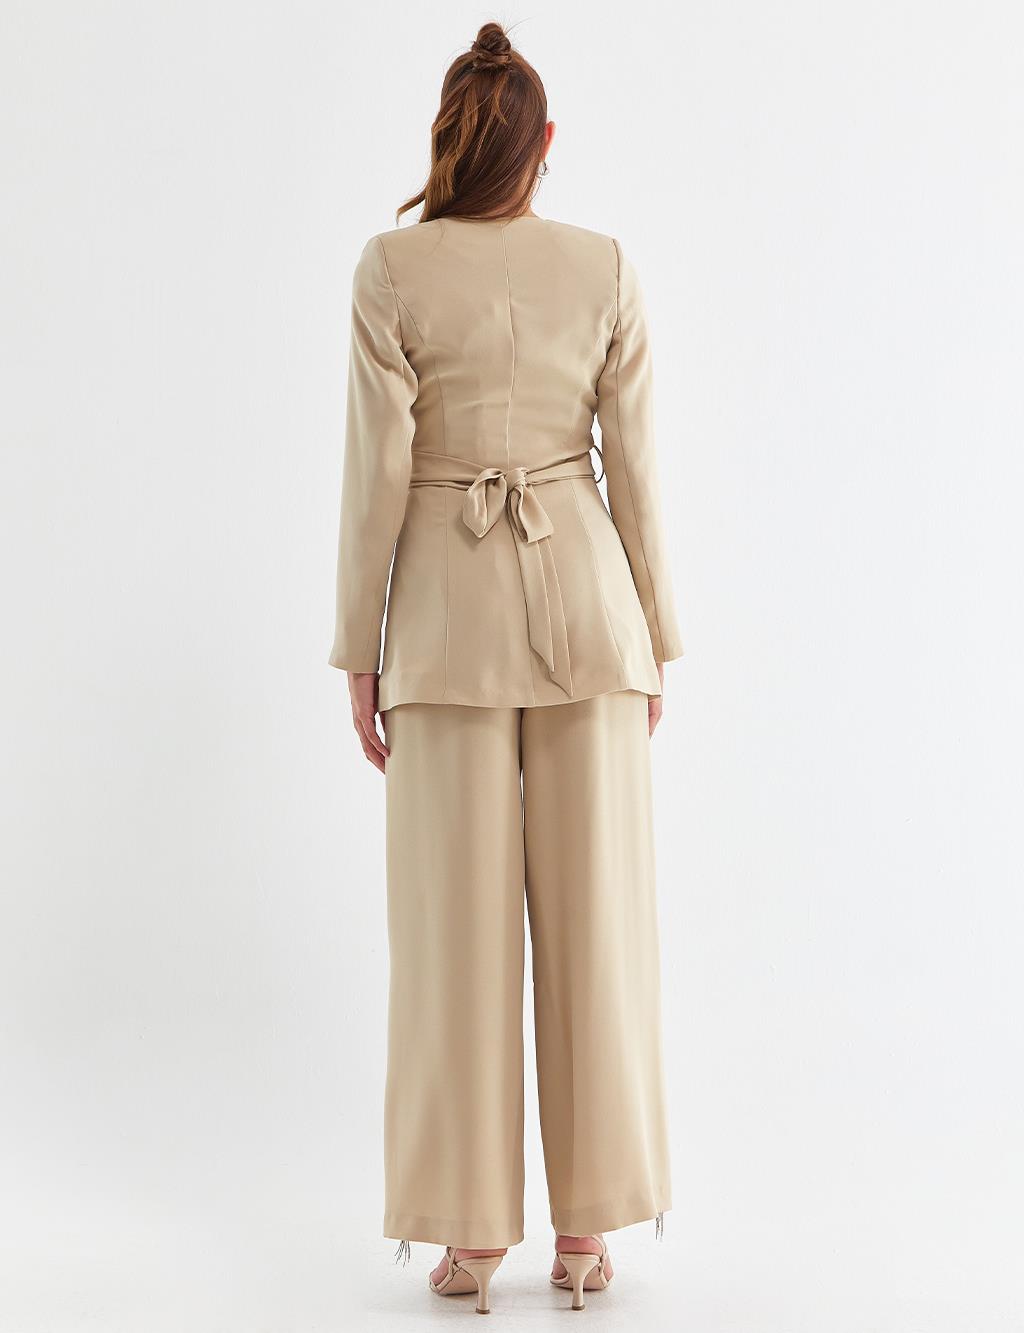 Fringed Double Breasted Suit Sand Beige